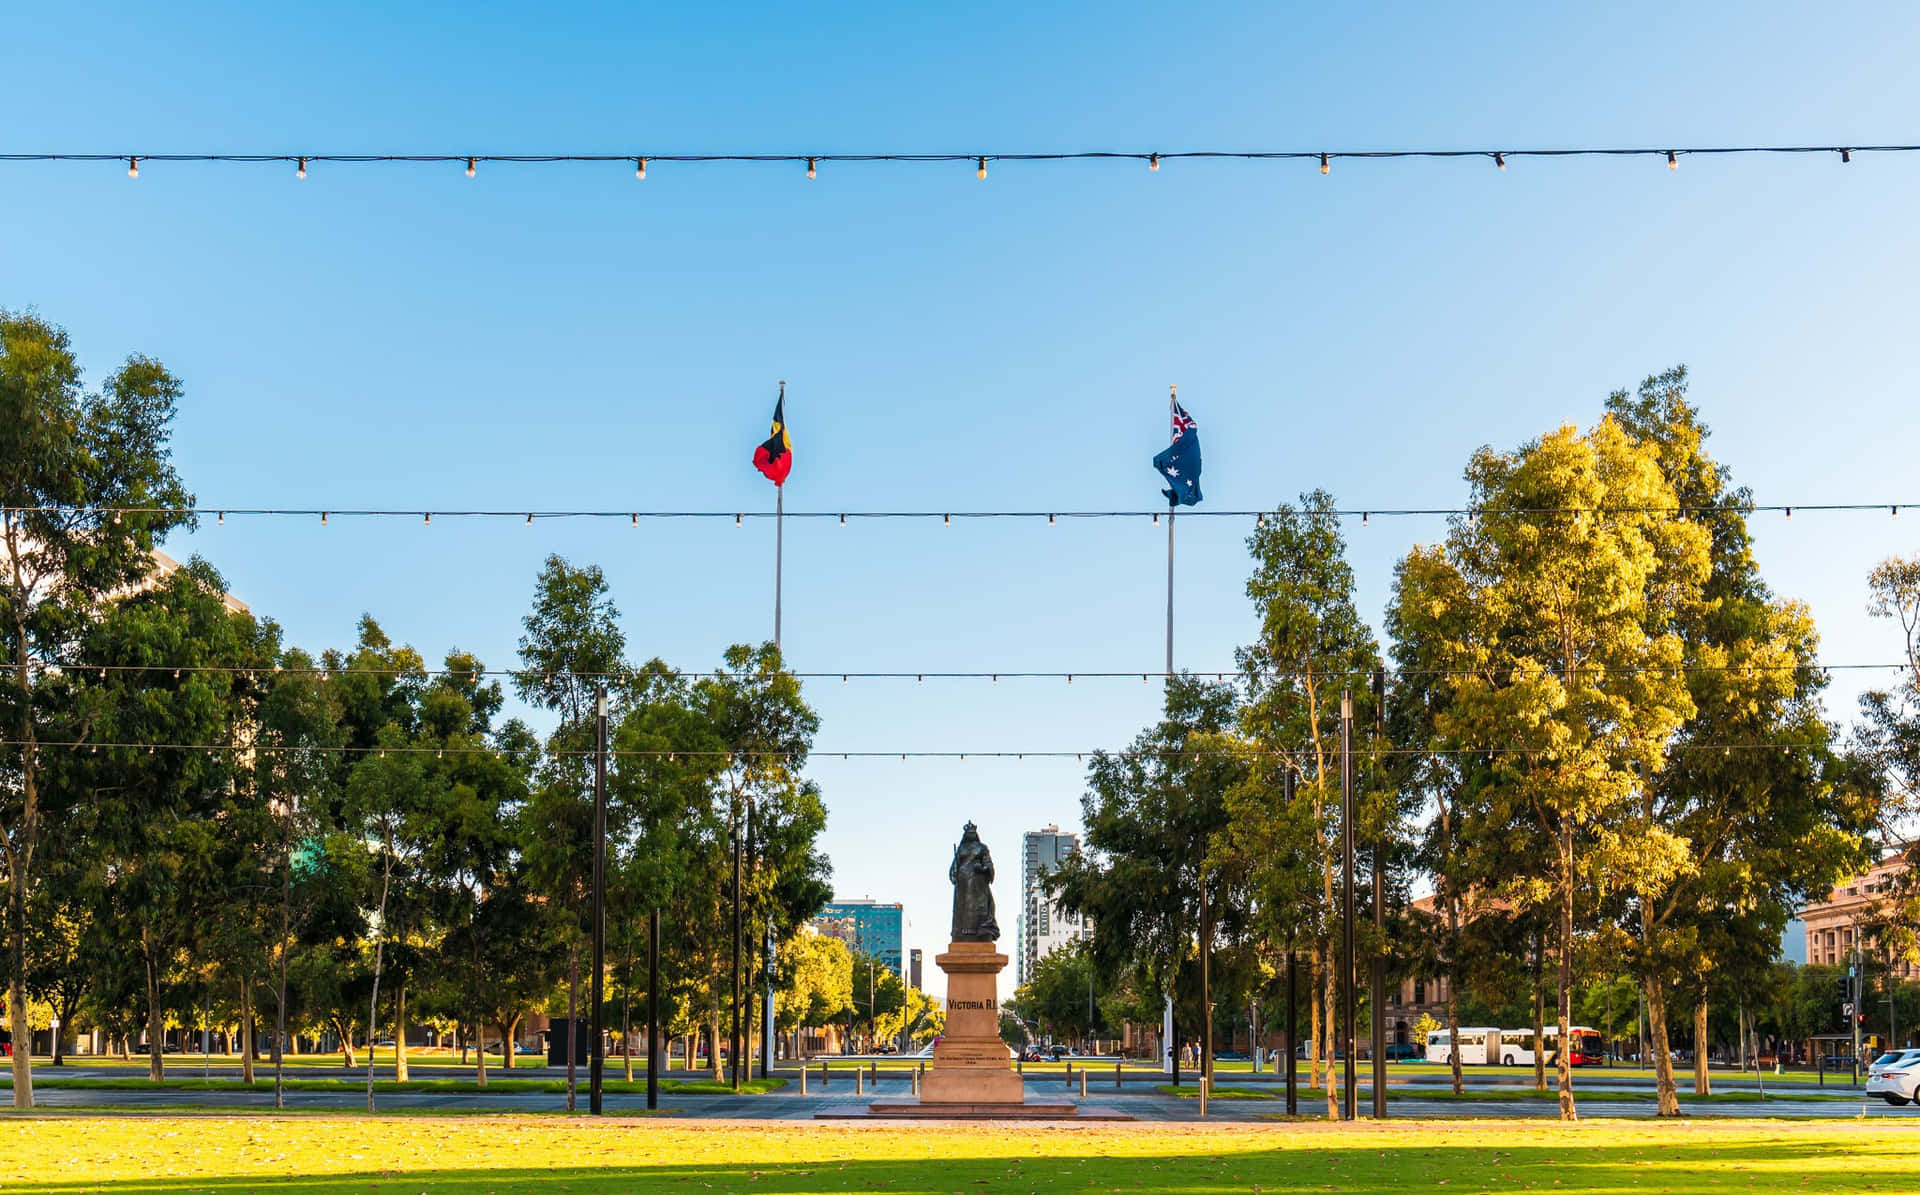 Adelaide Victoria Square Statueand Flags Wallpaper